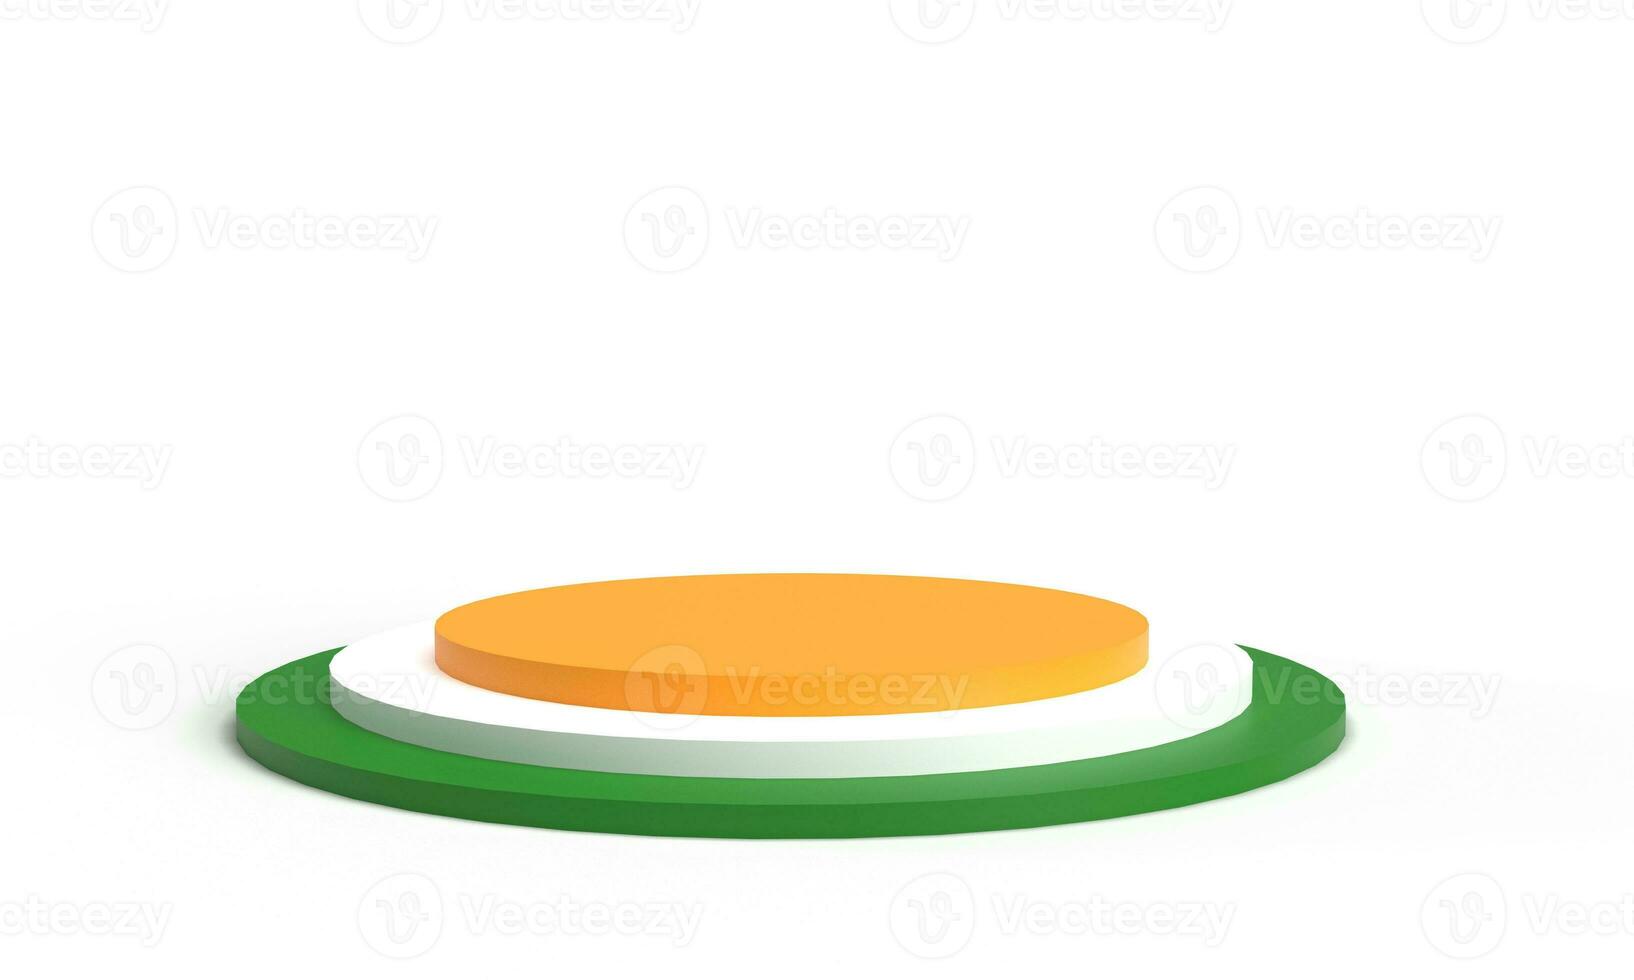 orange yellow white green colour podium round circle object step symbol sign icon decoration ornament republic india country national 26 january platform stage happy stage sale government politic photo